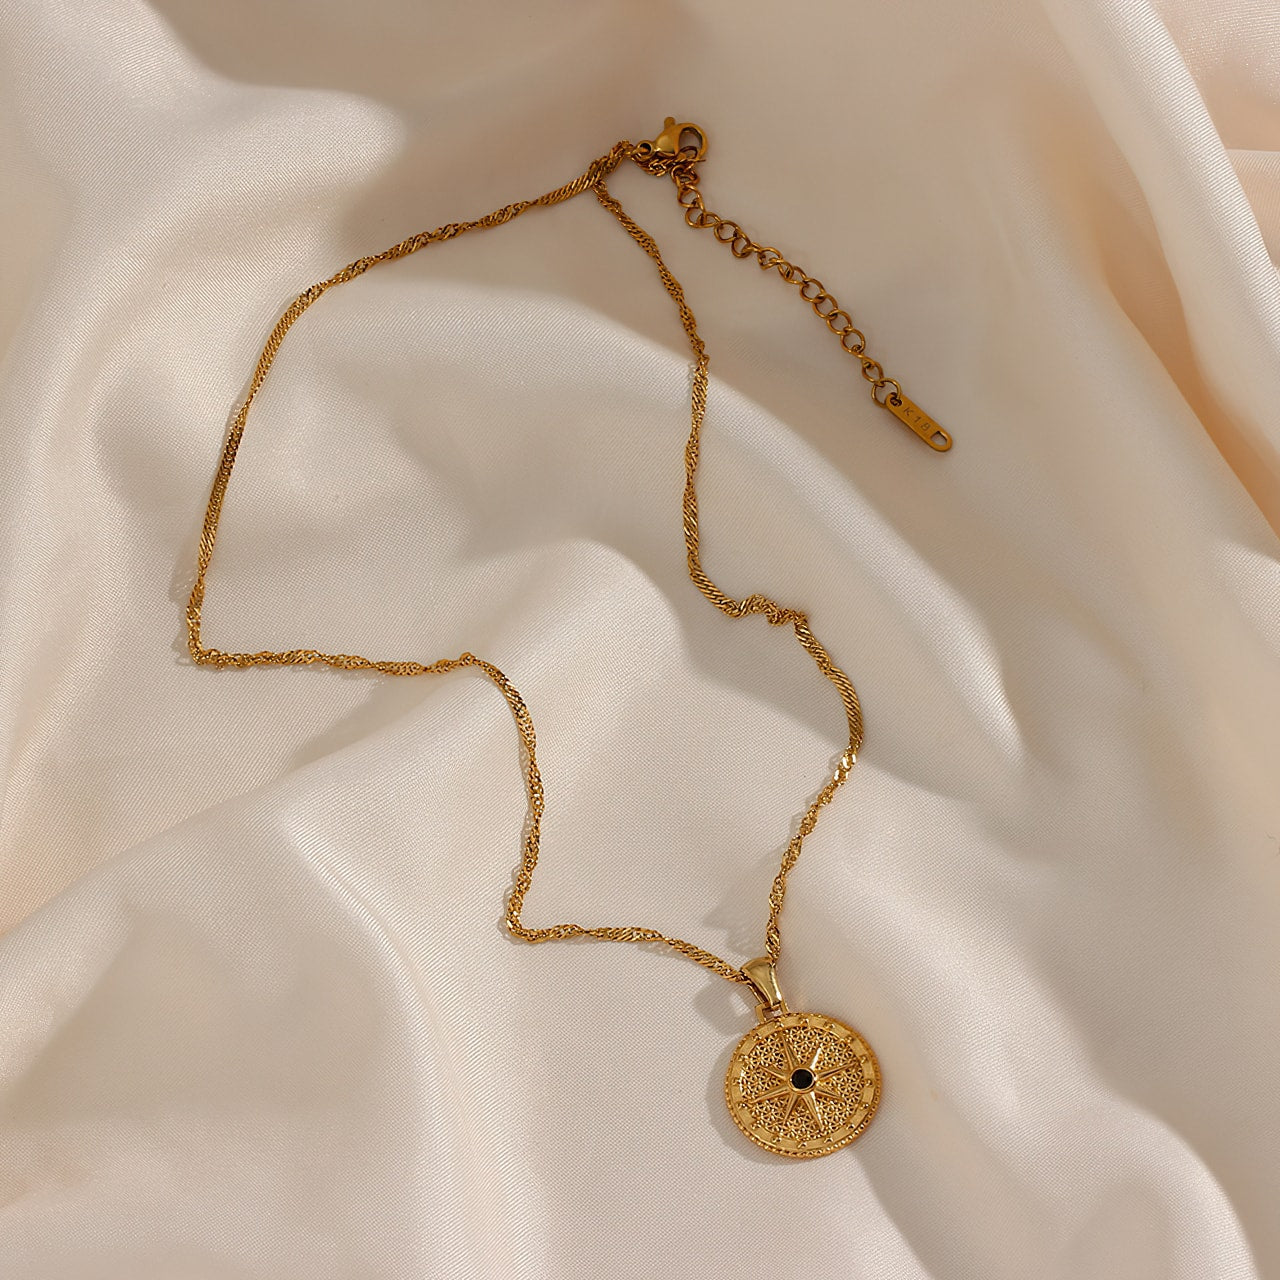 Vintage Star Compass 18k Gold Plated Pendant Necklace - Maci